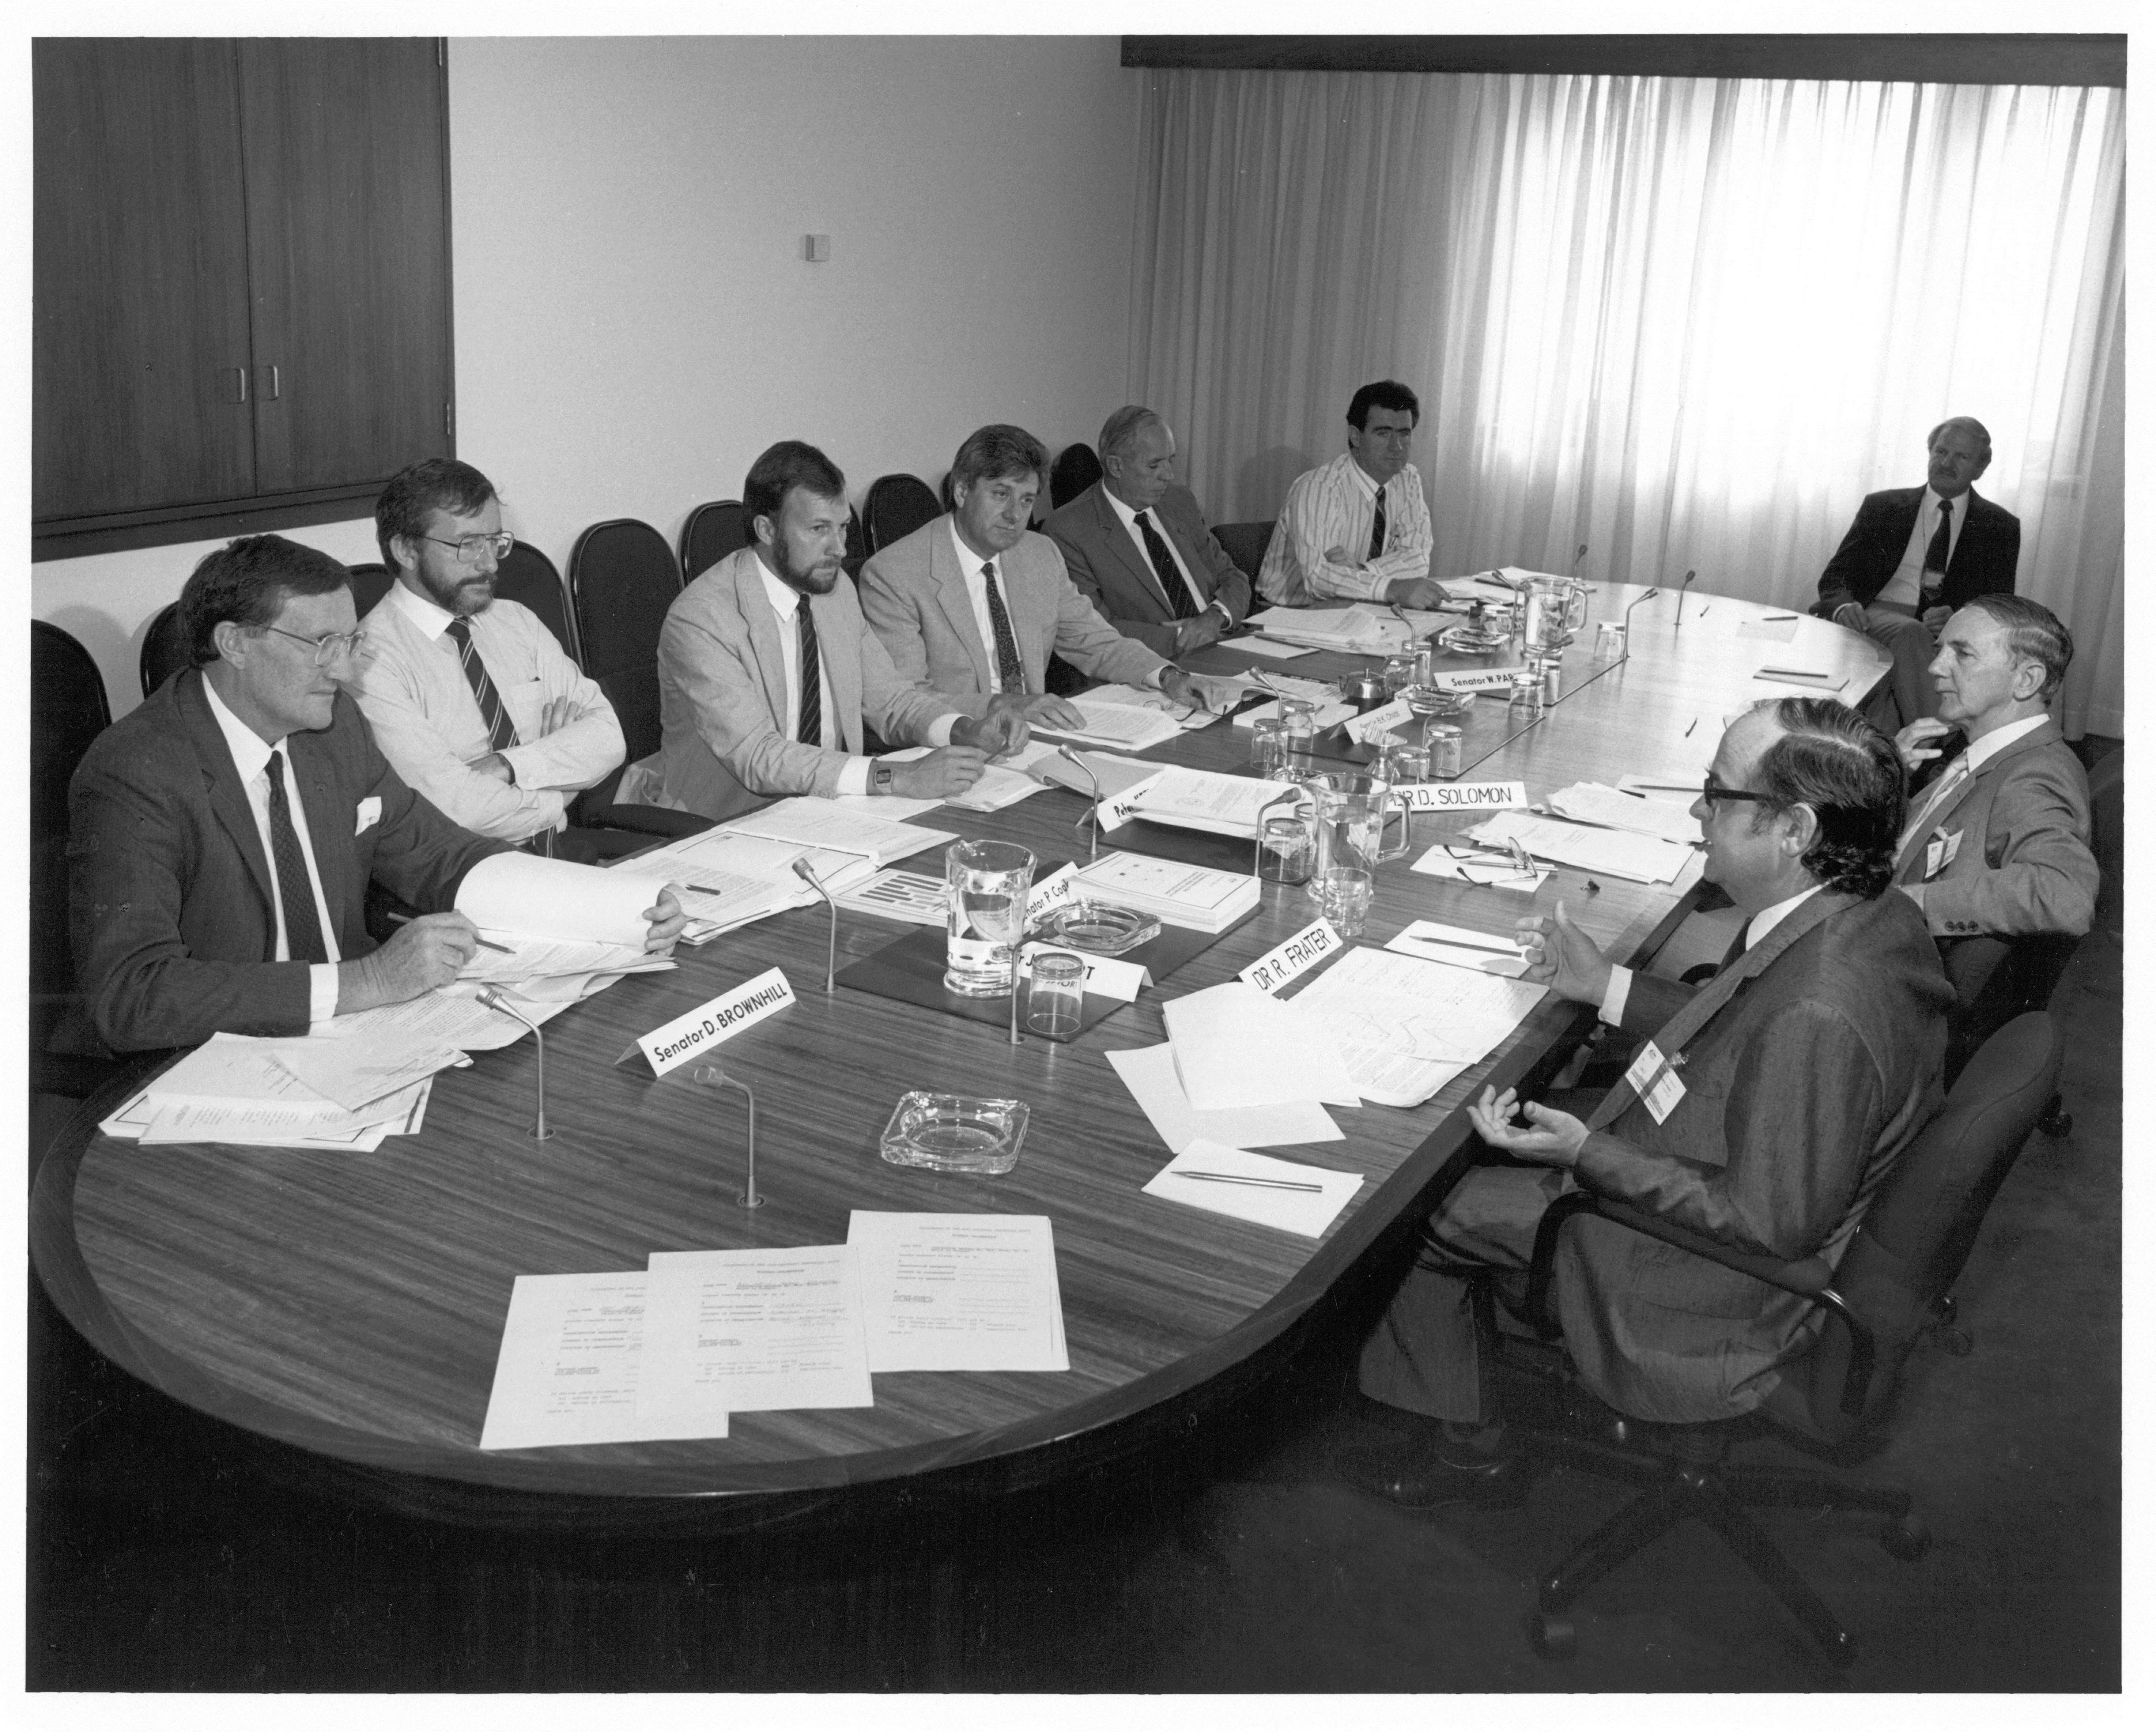 Standing Committee on Industry and Trade, 26 March 1987. Clockwise around table from left: Senators David Brownhill and Peter Cook, Peter Keele [Secretary], Senators Bruce Childs [Chair], Warwick Parer and Jim McKiernan, Michael Game [Research Officer], witnesses Dr David Solomon [Acting Director, Institute of Industrial Technology, CSIRO] and Dr Robert Frater [Chief of the Division of Radiophysics, CSIRO]. NAA: A6180, 31/3/87/66.